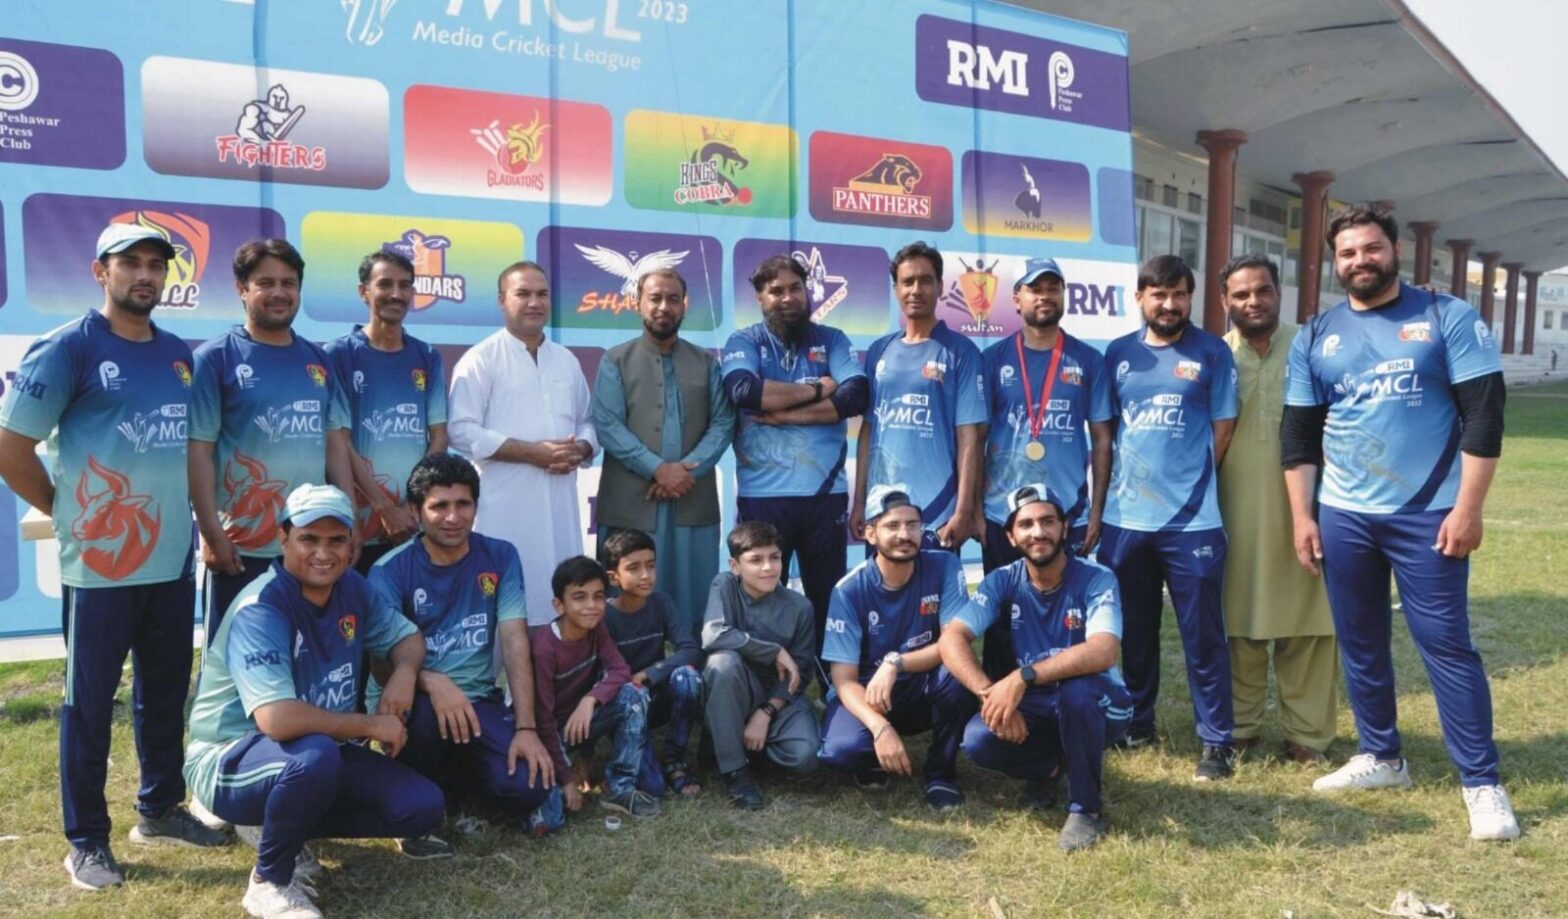 PPC Fighters qualified for the finals of the RMI Media Cricket League